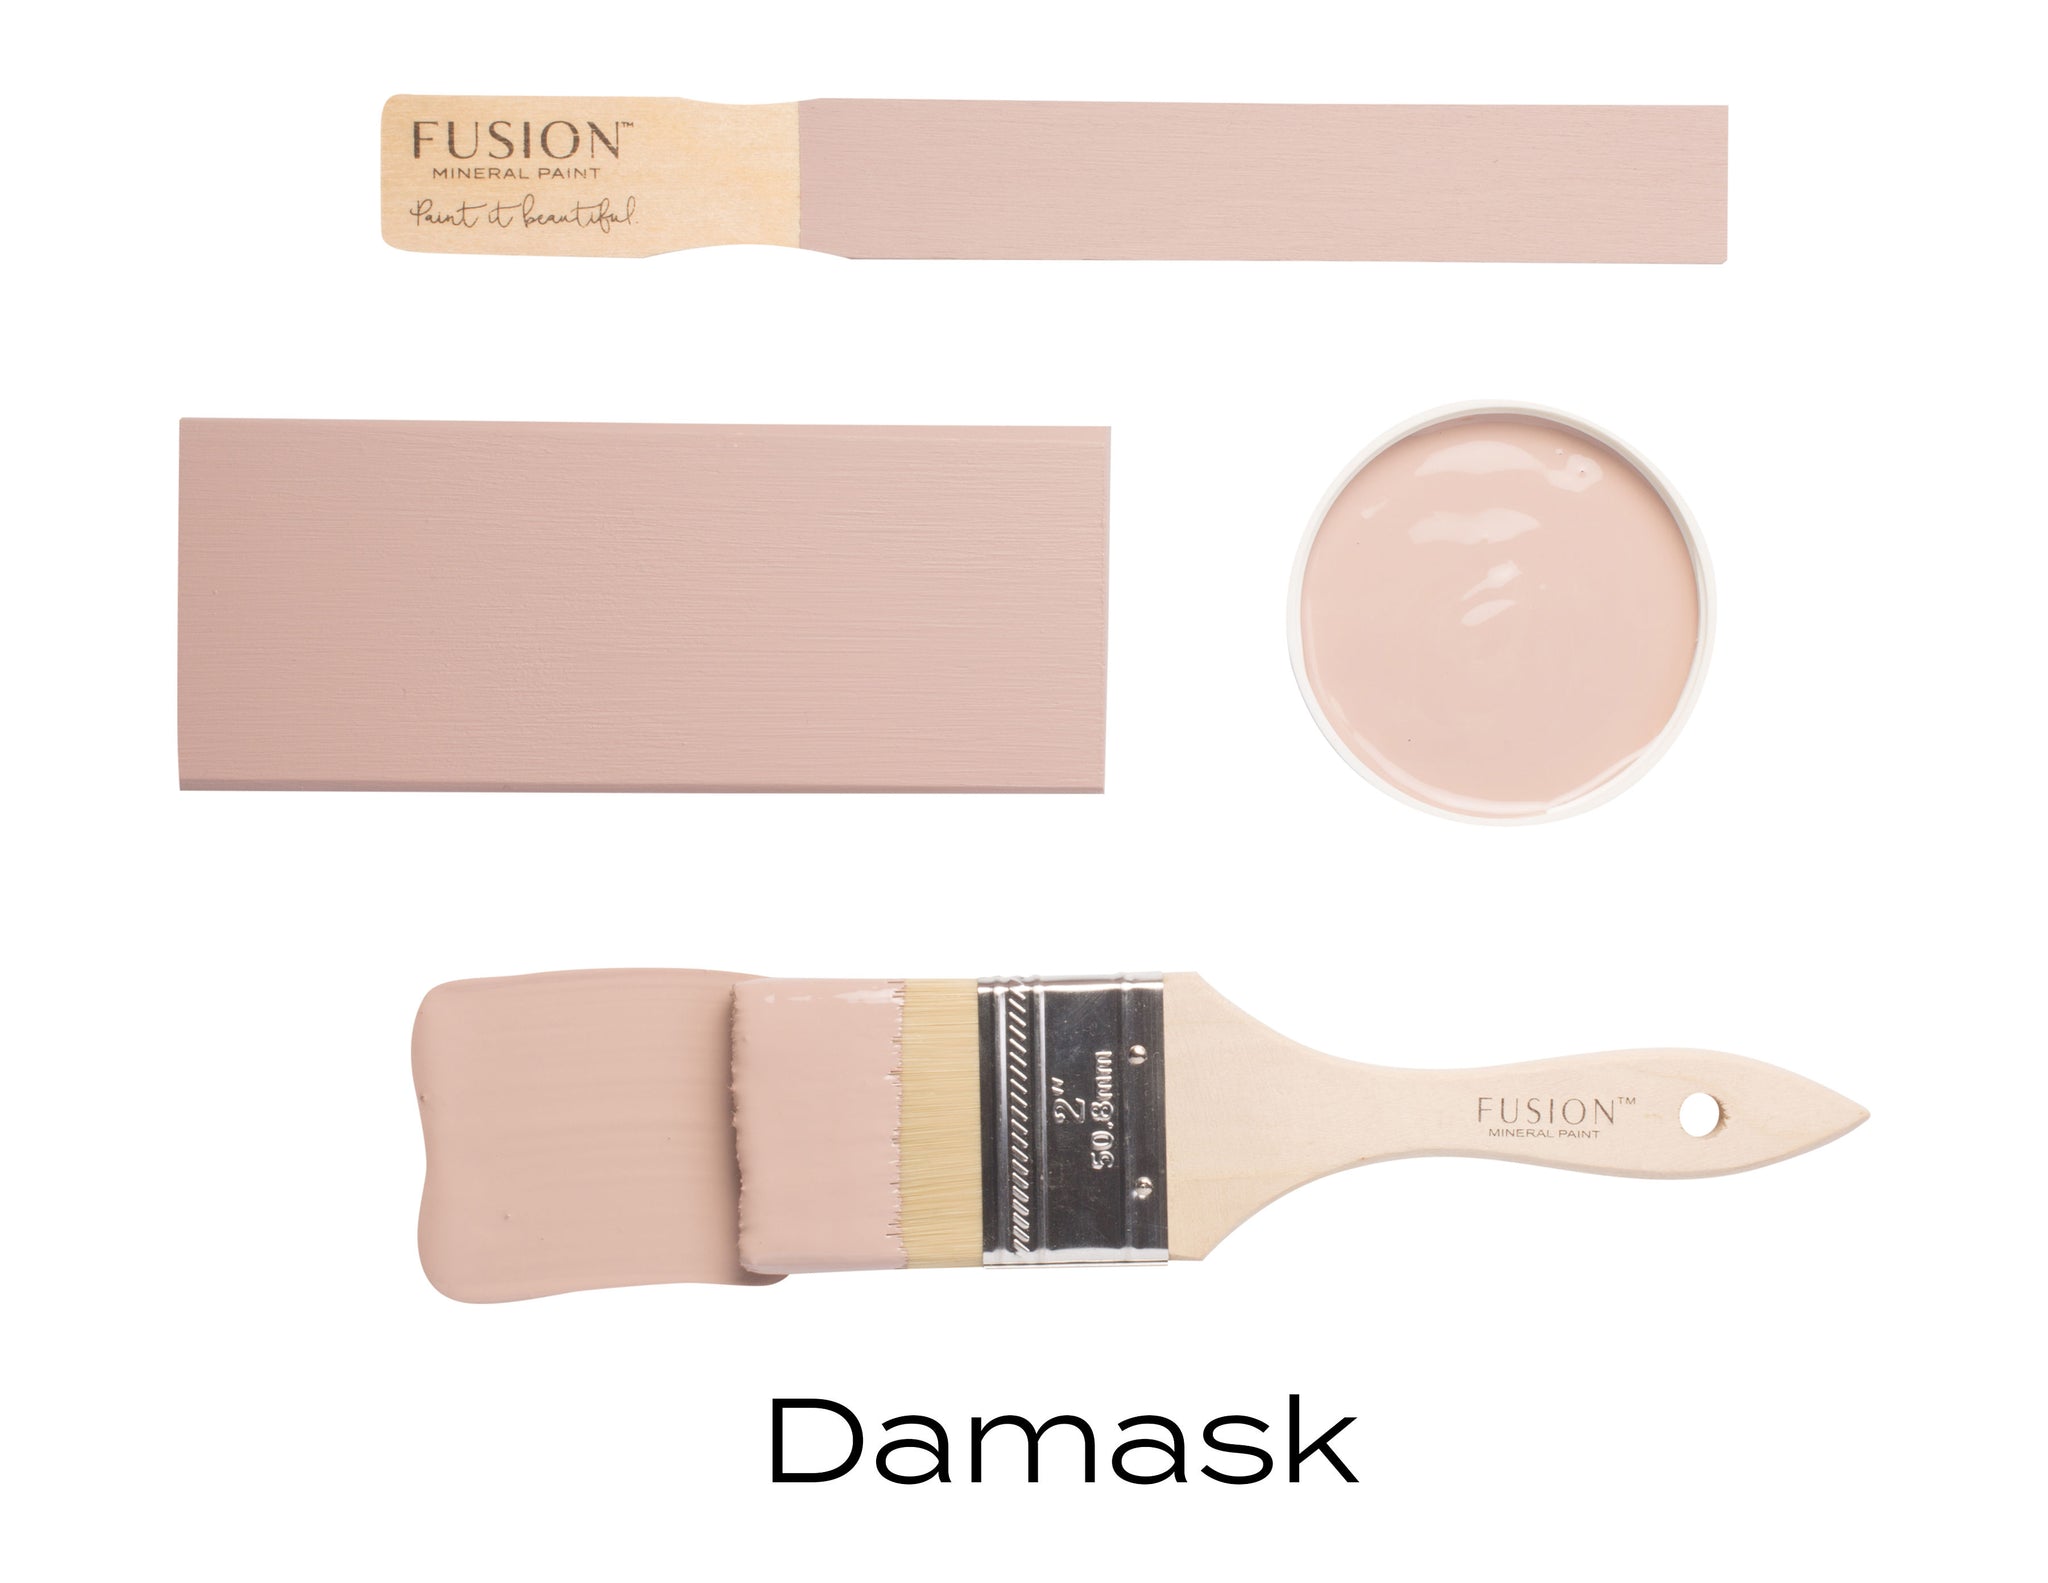 FUSION™ MINERAL PAINT - Damask